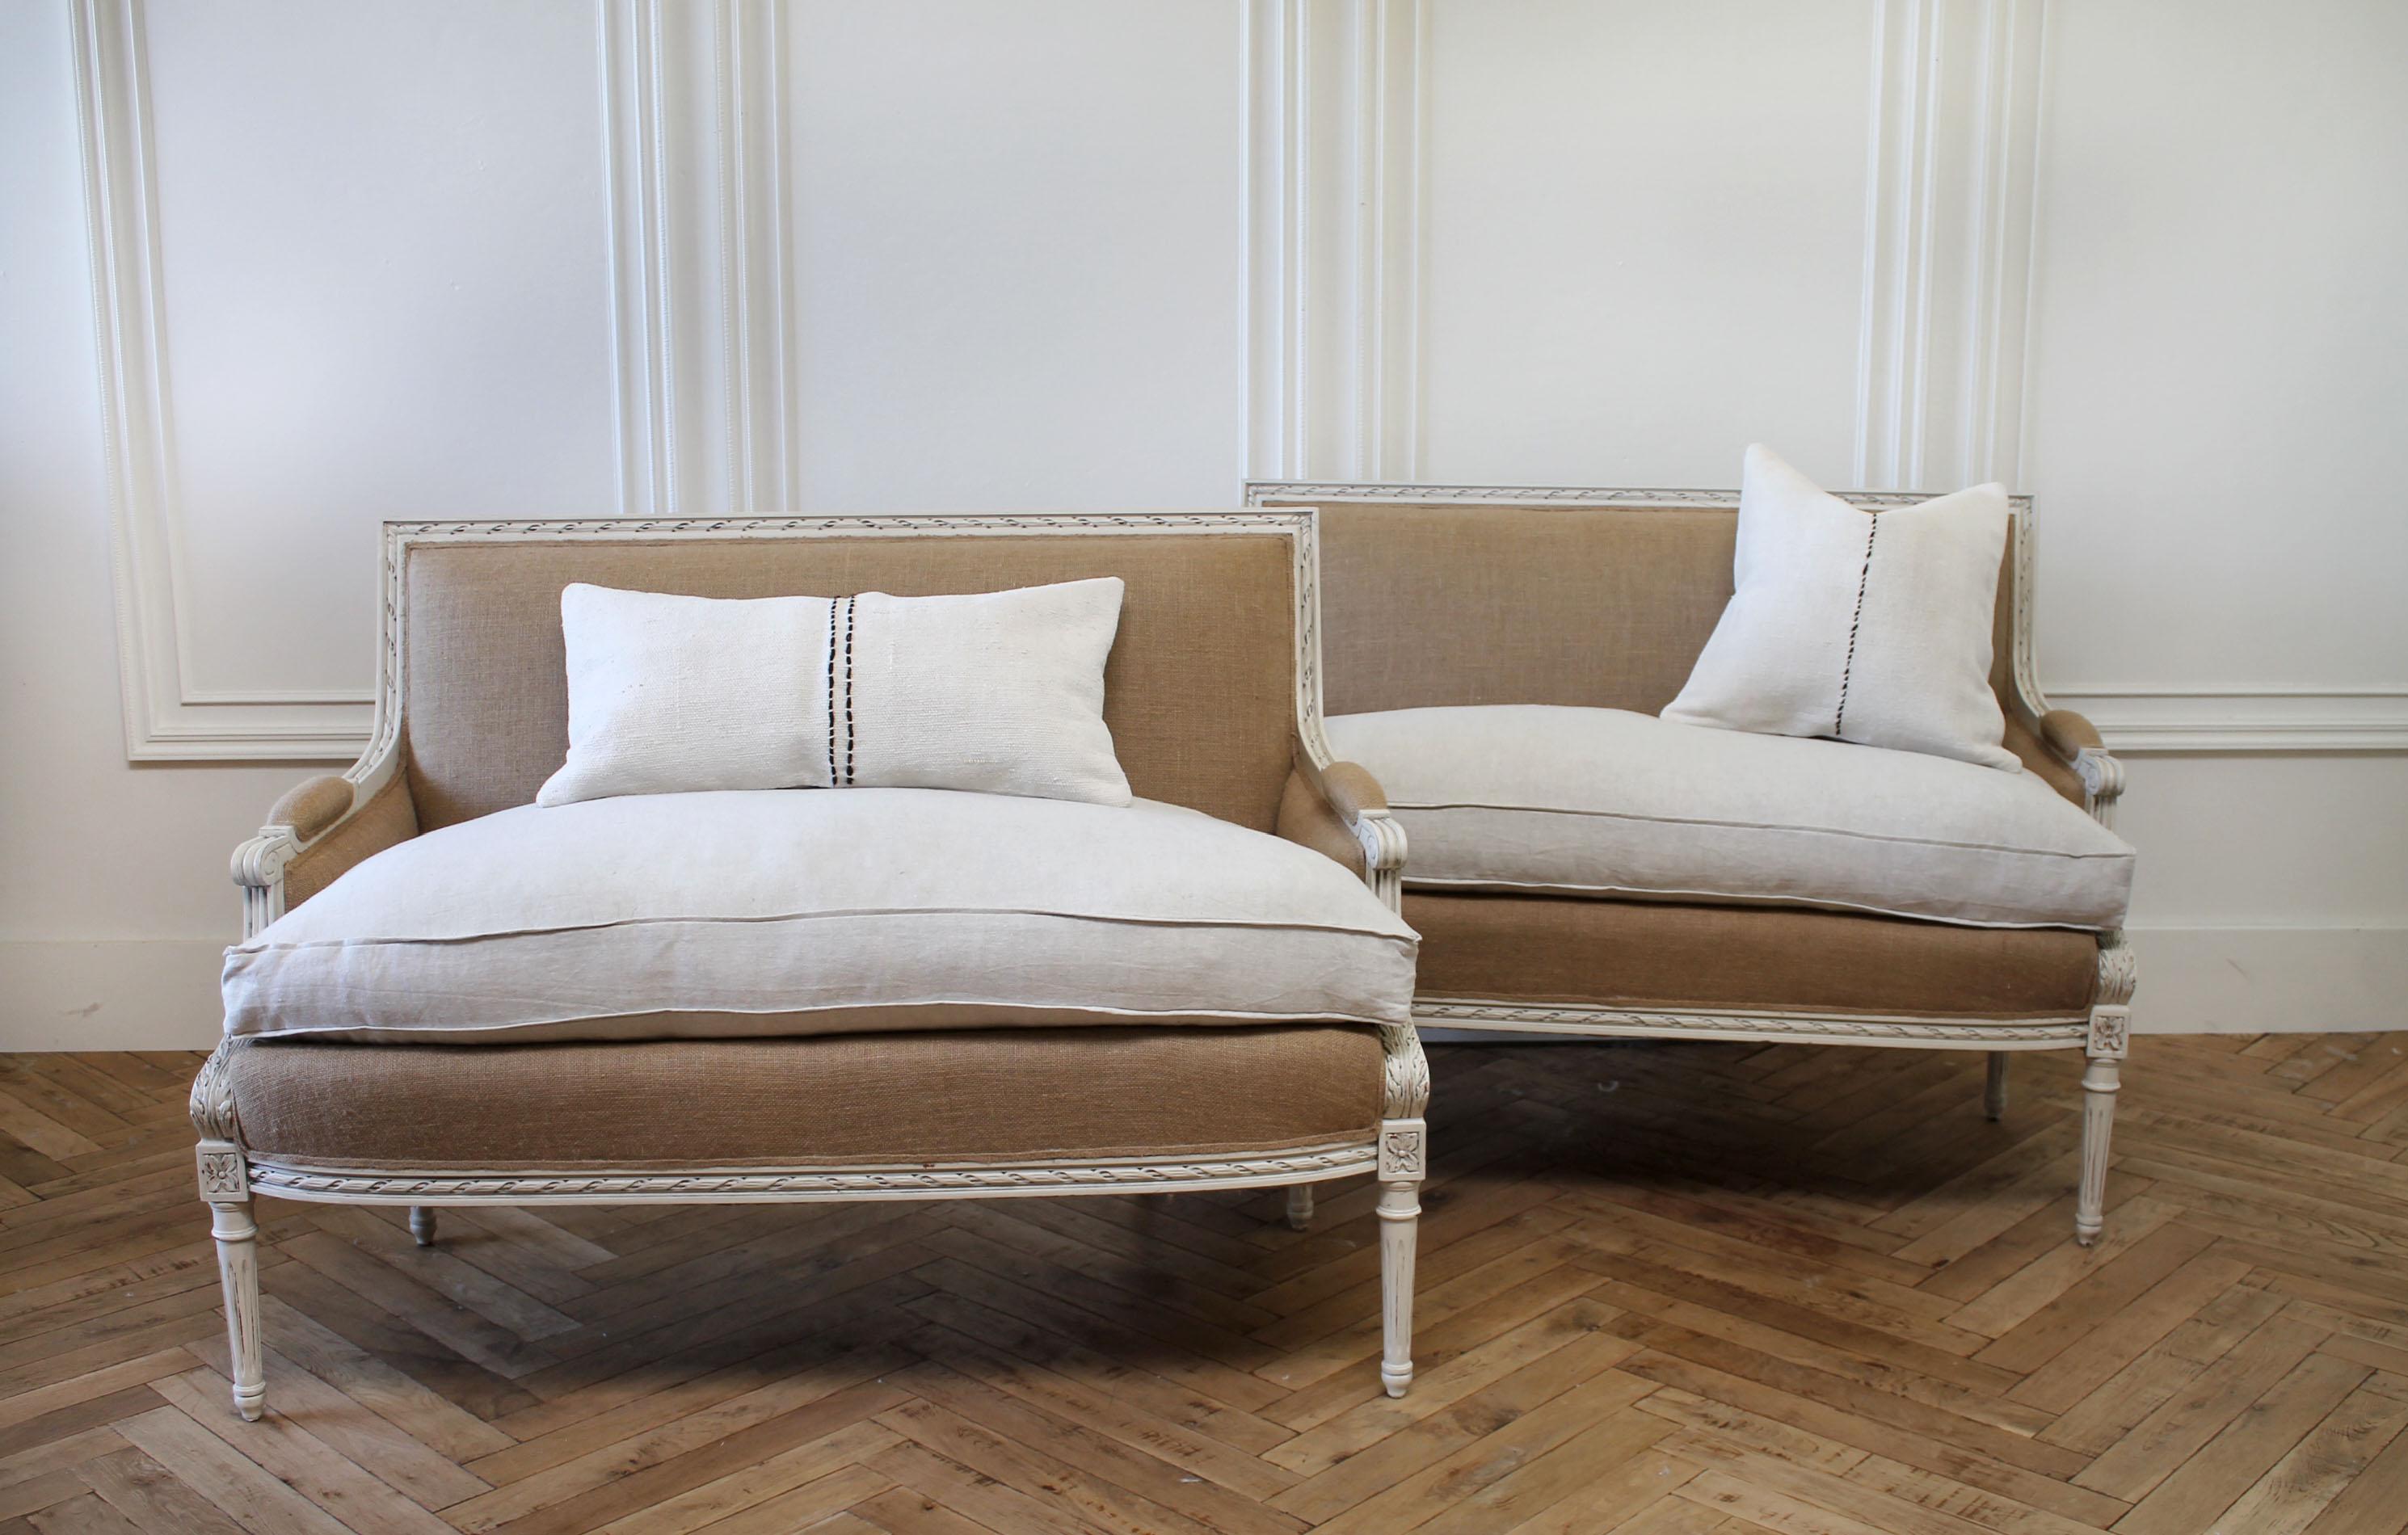 Matching painted and upholstered vintage Louis XVI style settees
Painted in oyster white finish with subtle distressed edges, and antique patina. A linen slip covered cushion in natural, over a down wrapped seat.
Can be machine washed if